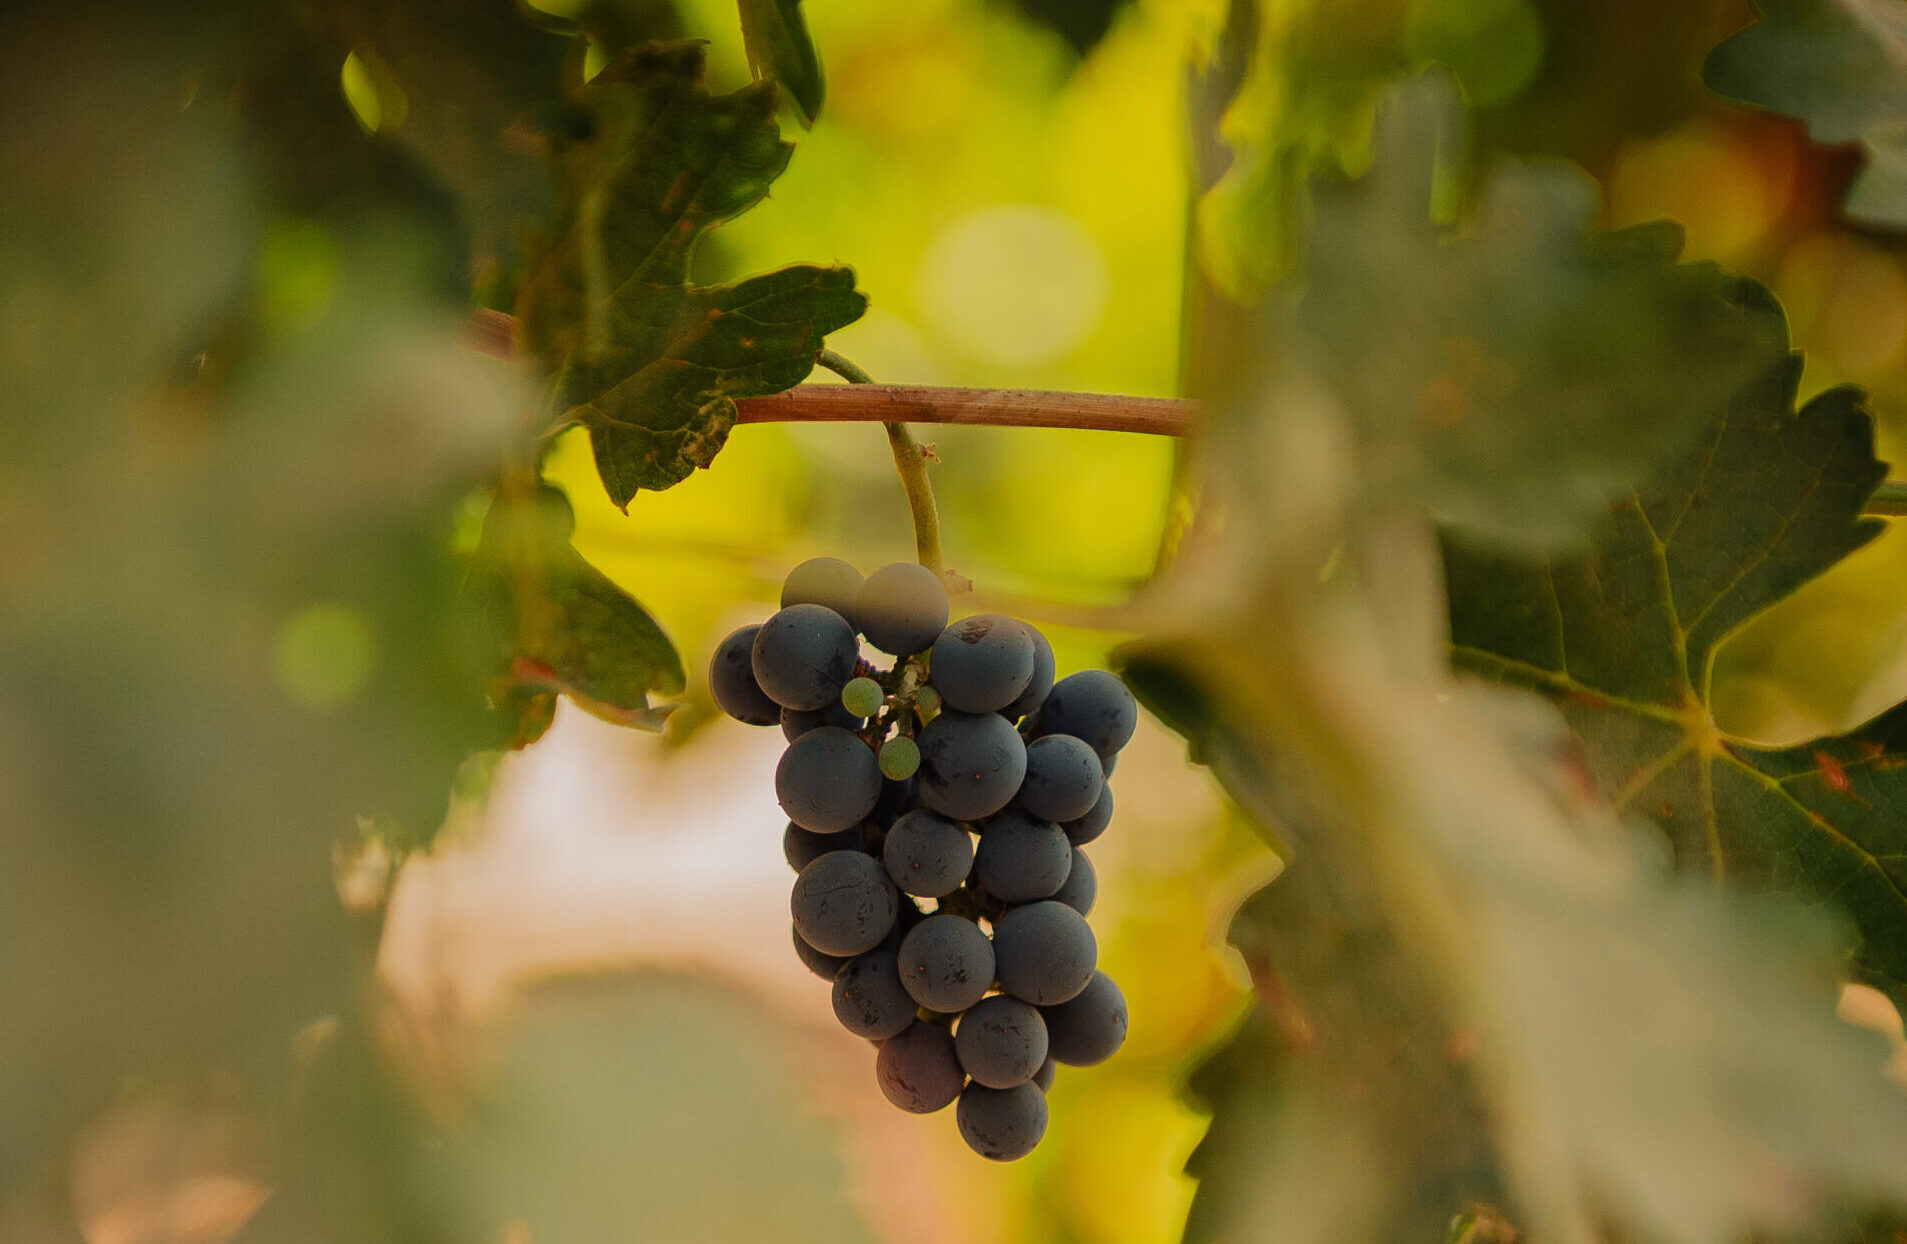 Central Valley wine grapes